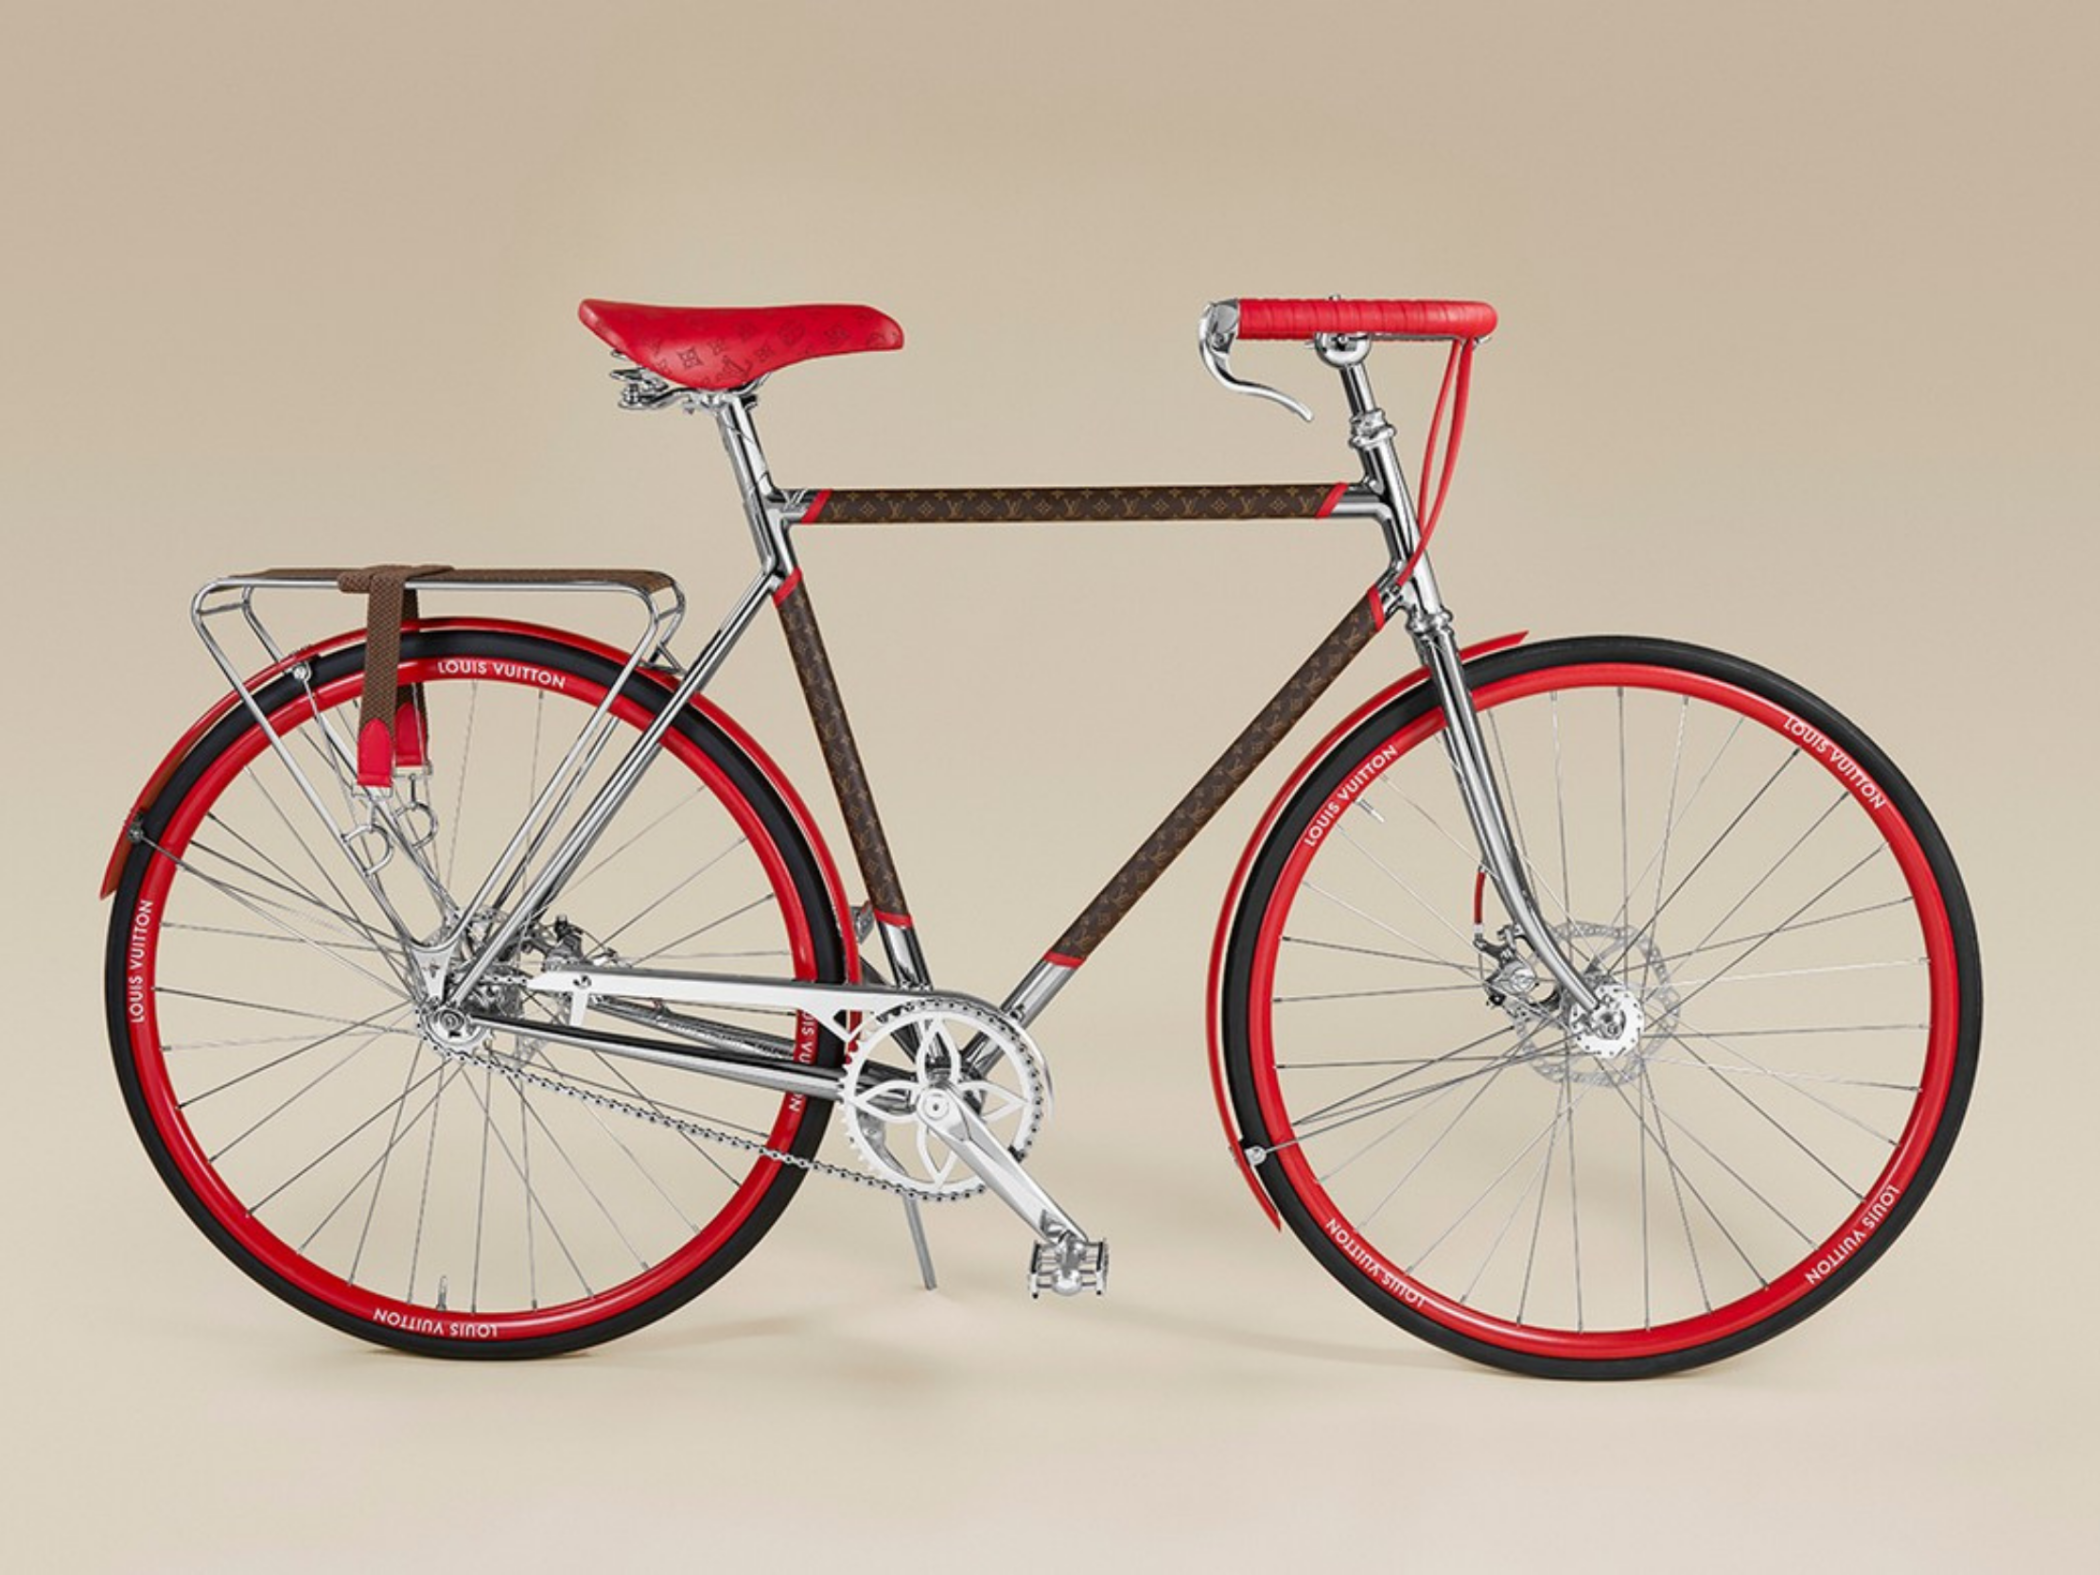 BrandConnection] The new Louis Vuitton x Maison Tamboite bike is one of the  most amazing creations between 2 exceptional brands!